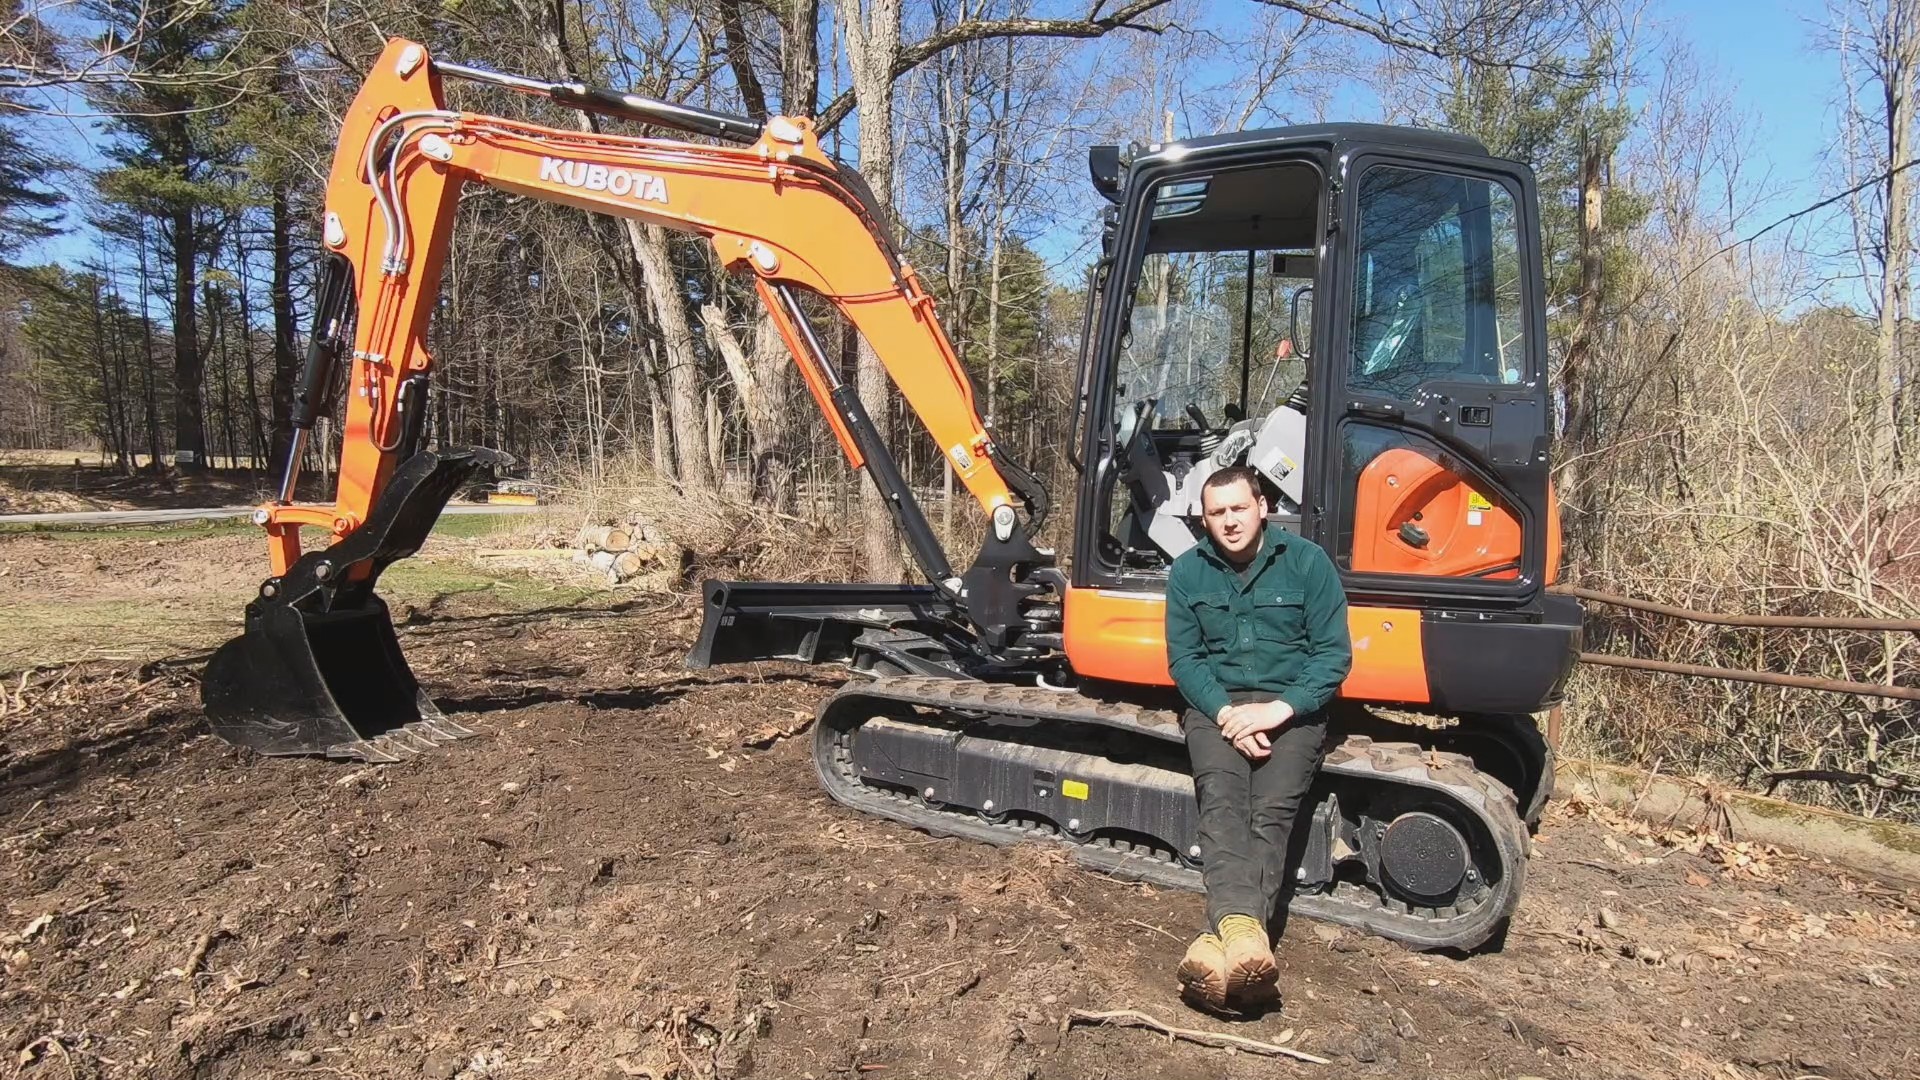 Watch the Kubota KX057 Clear Land - How fast is it?